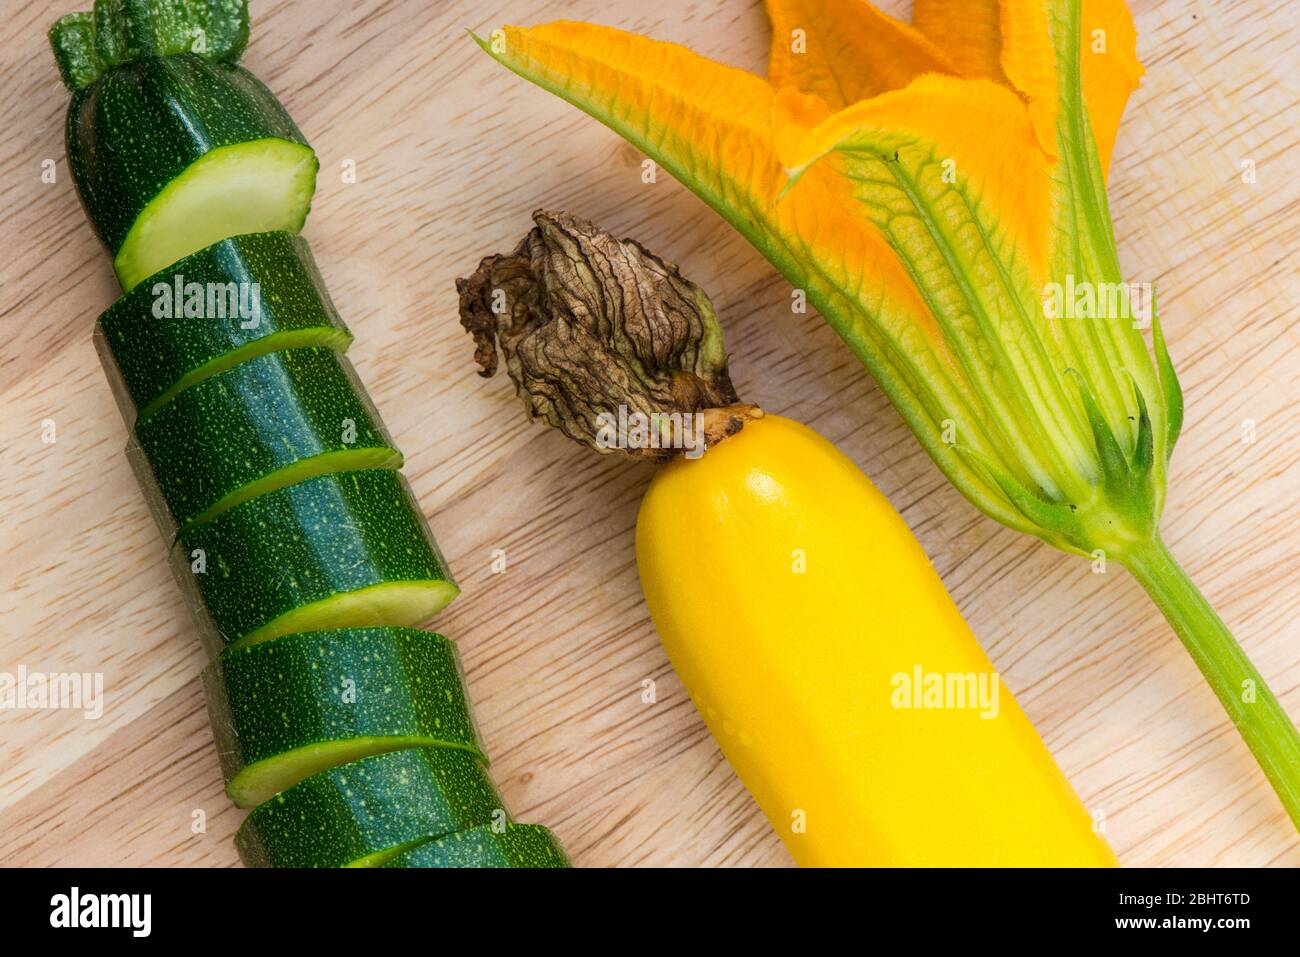 Courgettes with male flower on the kitchen chopping board Stock Photo